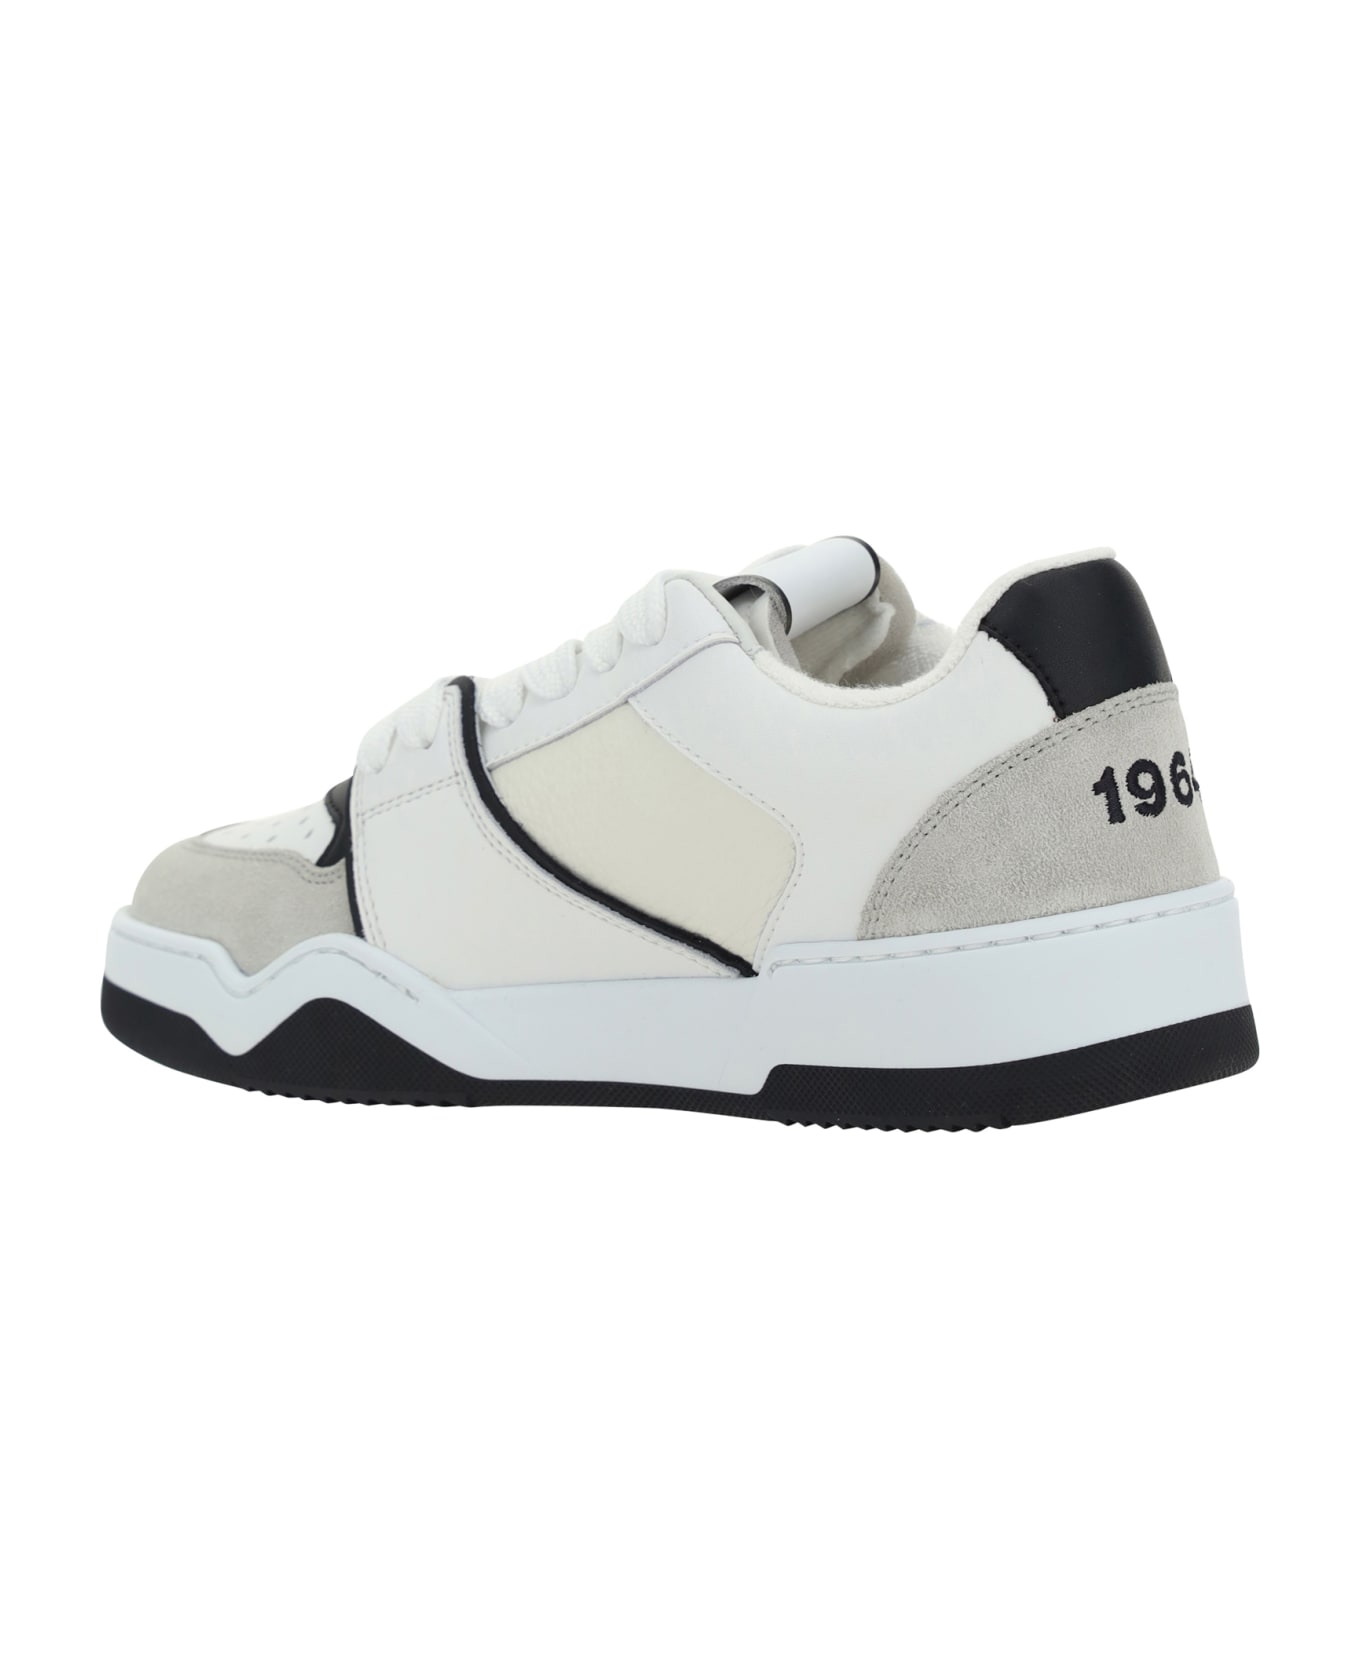 Dsquared2 'spiker' Sneakers - M072